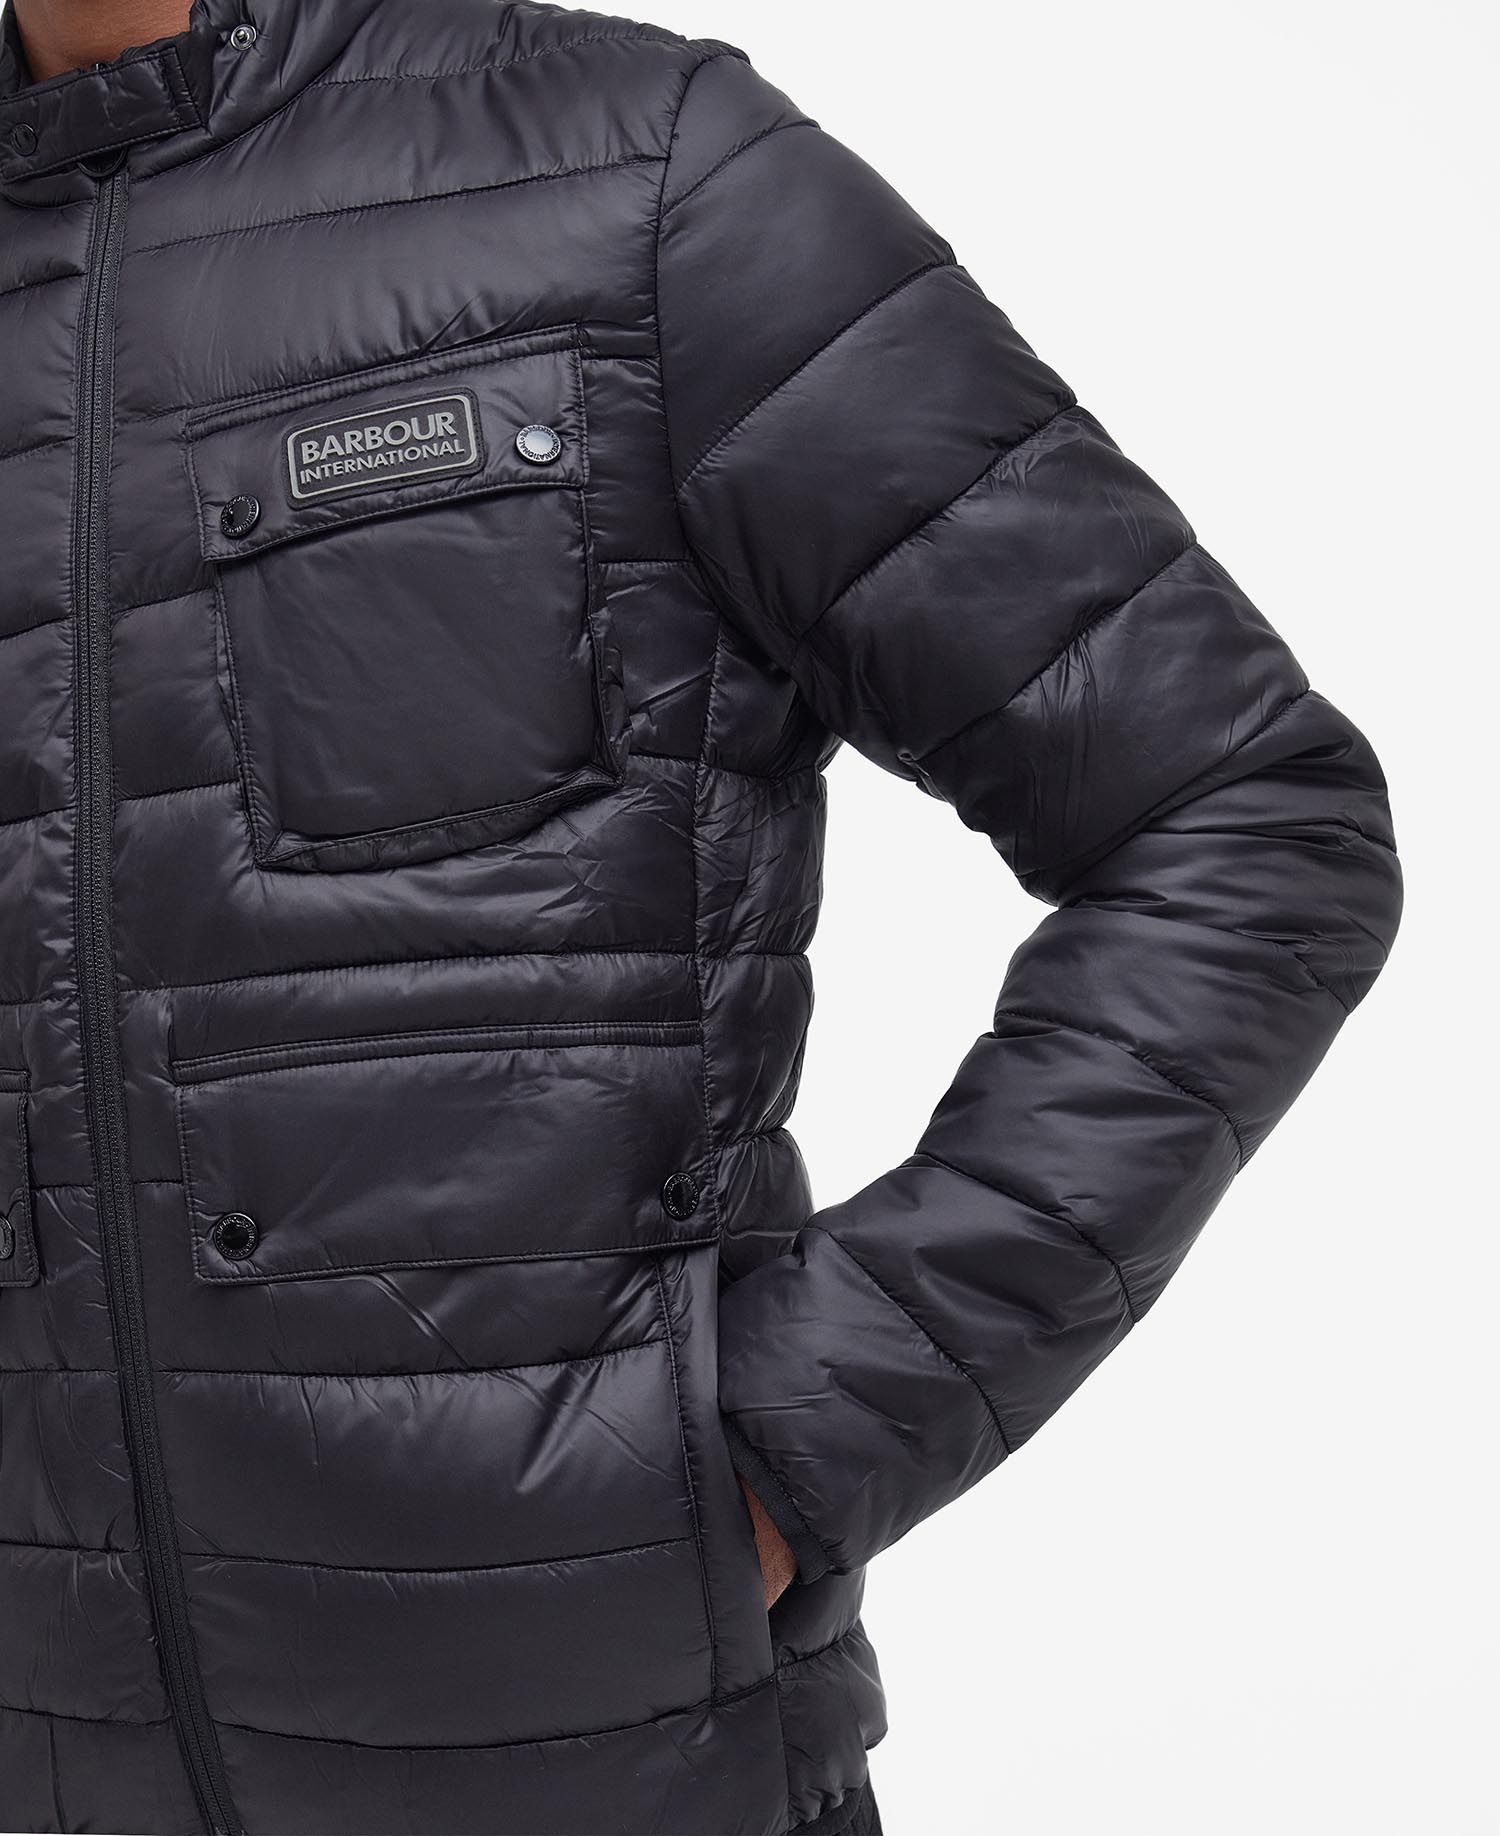 Shop the B.Intl Bowsden Baffle Quilted Jacket today. | Barbour